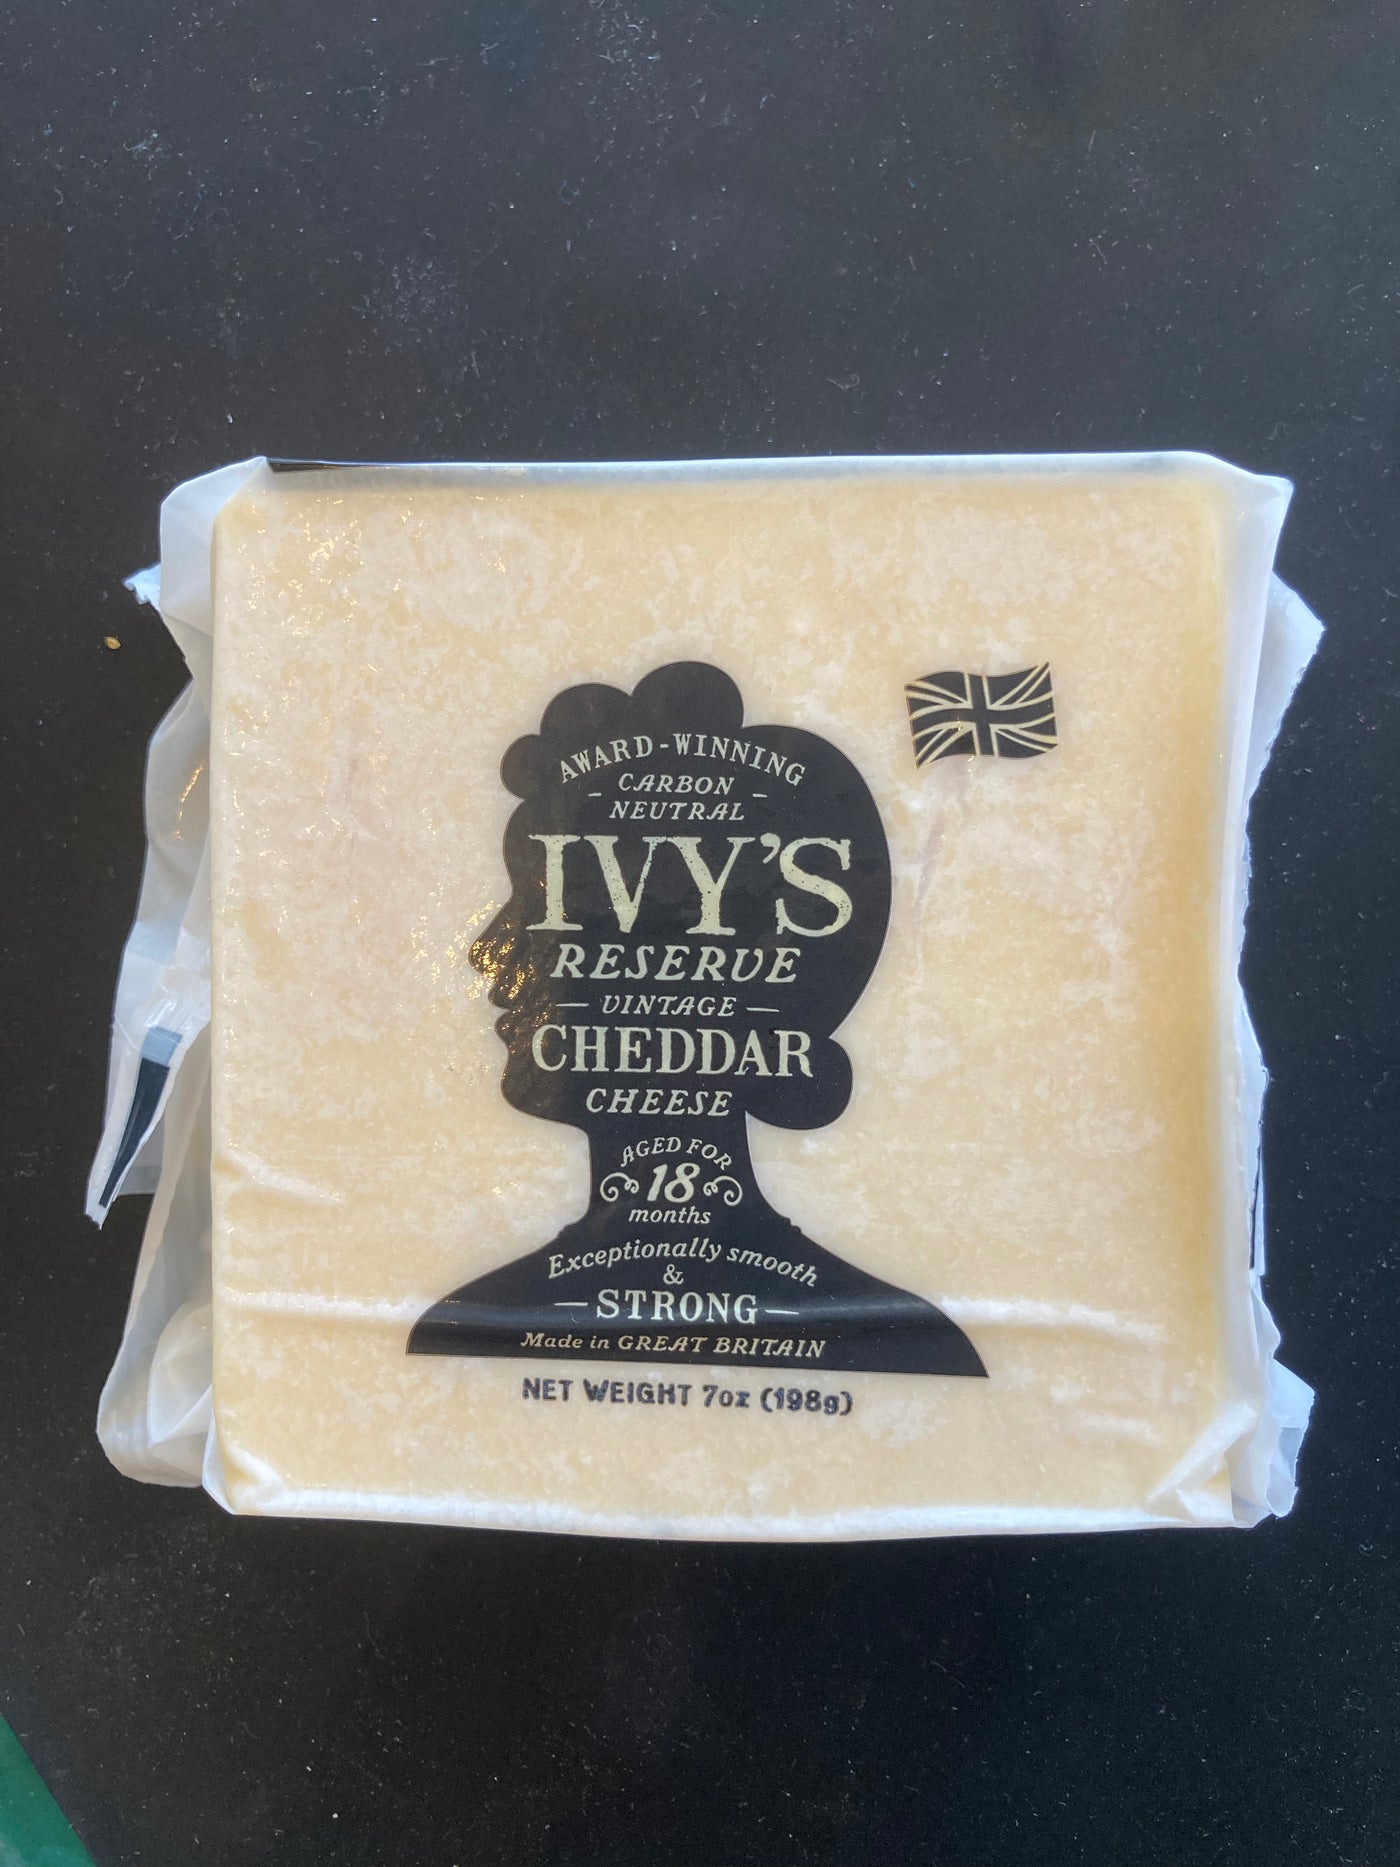 Ivy's Reserve Vintage Cheddar Cheese